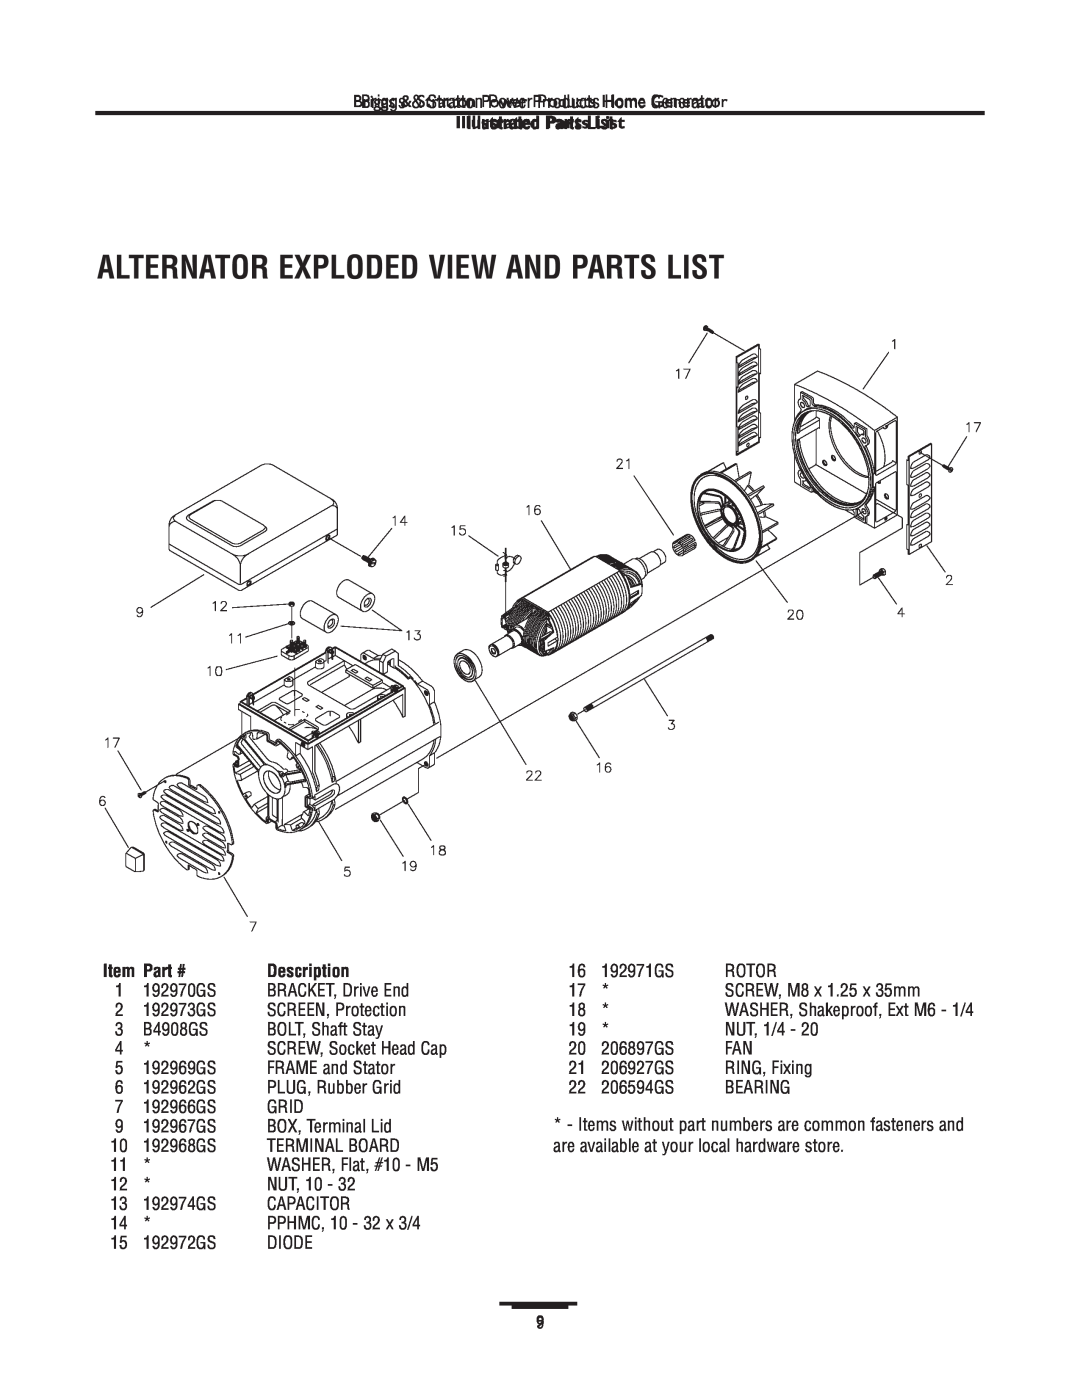 Briggs & Stratton 1815 manual Alternator Exploded View And Parts List, Illustrated PartsList, Part #, Description 